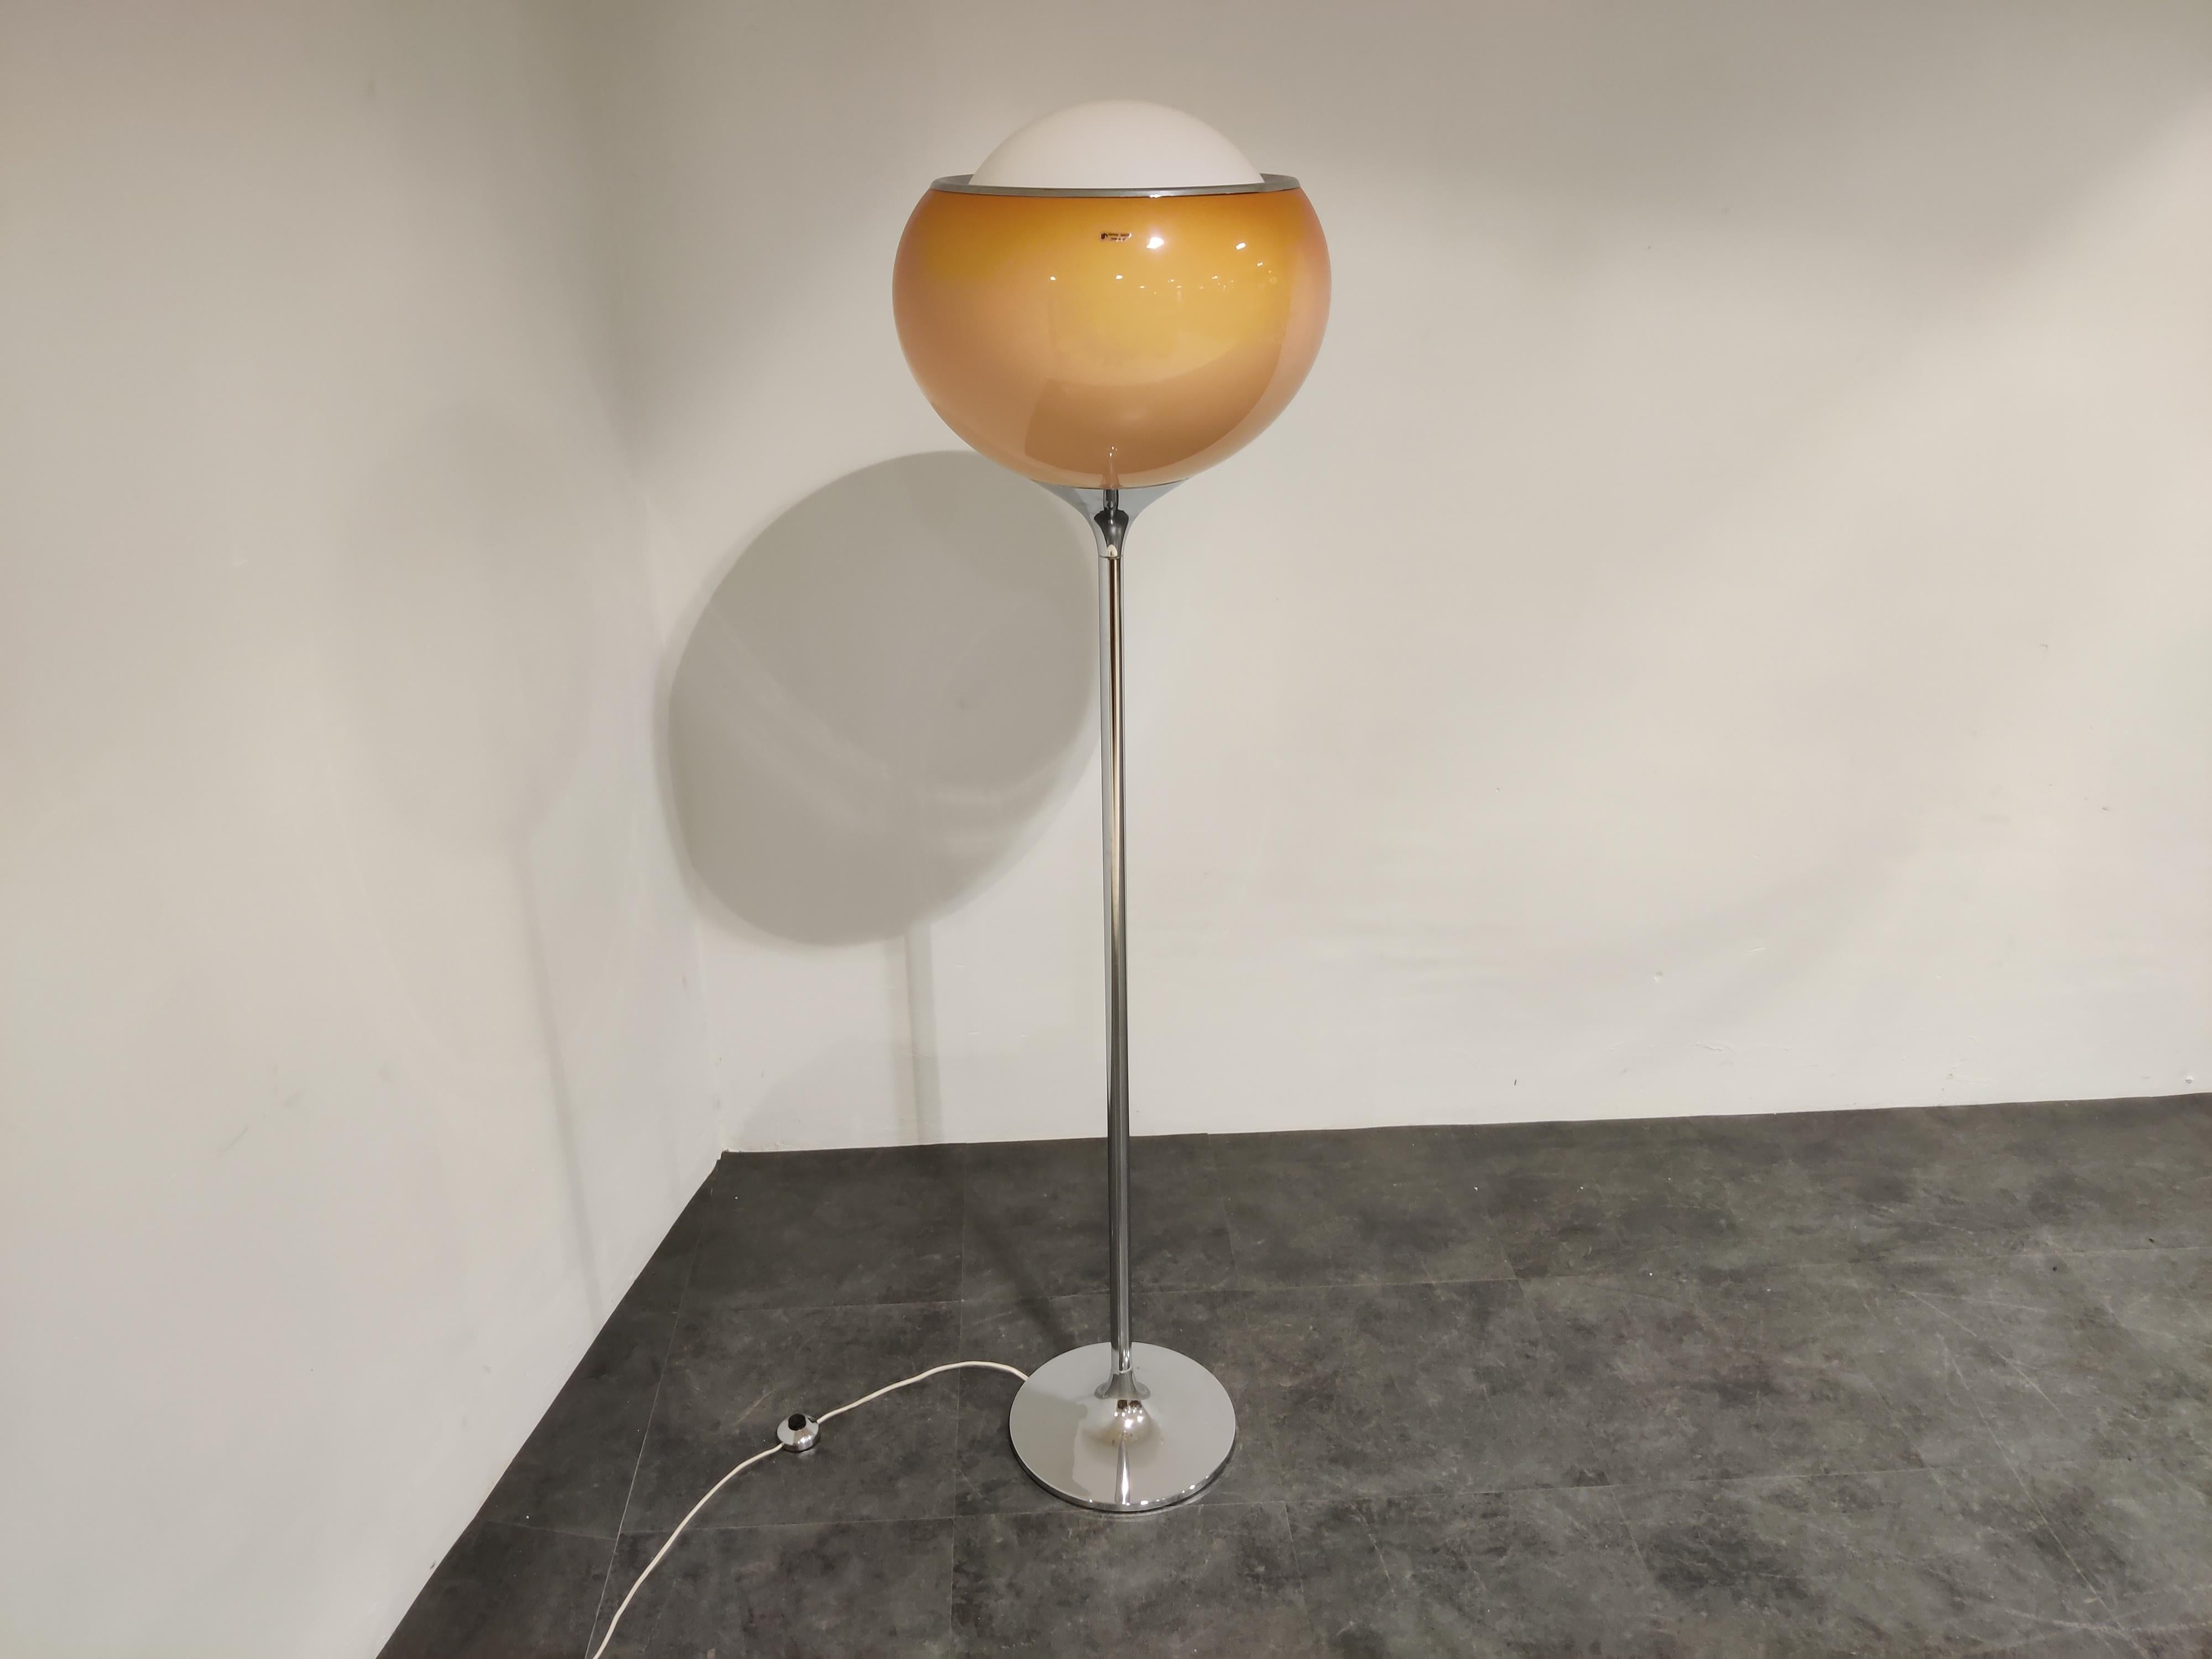 Midcentury floor lamp designed by Studio 6G, the design team of Harvey Guzzini in 1968.

Beautiful chromed base with an acrylic lamp shade creating a very warm and diffuse light.

Elegent and ambient floor lamp with a timeless design. 

1970s